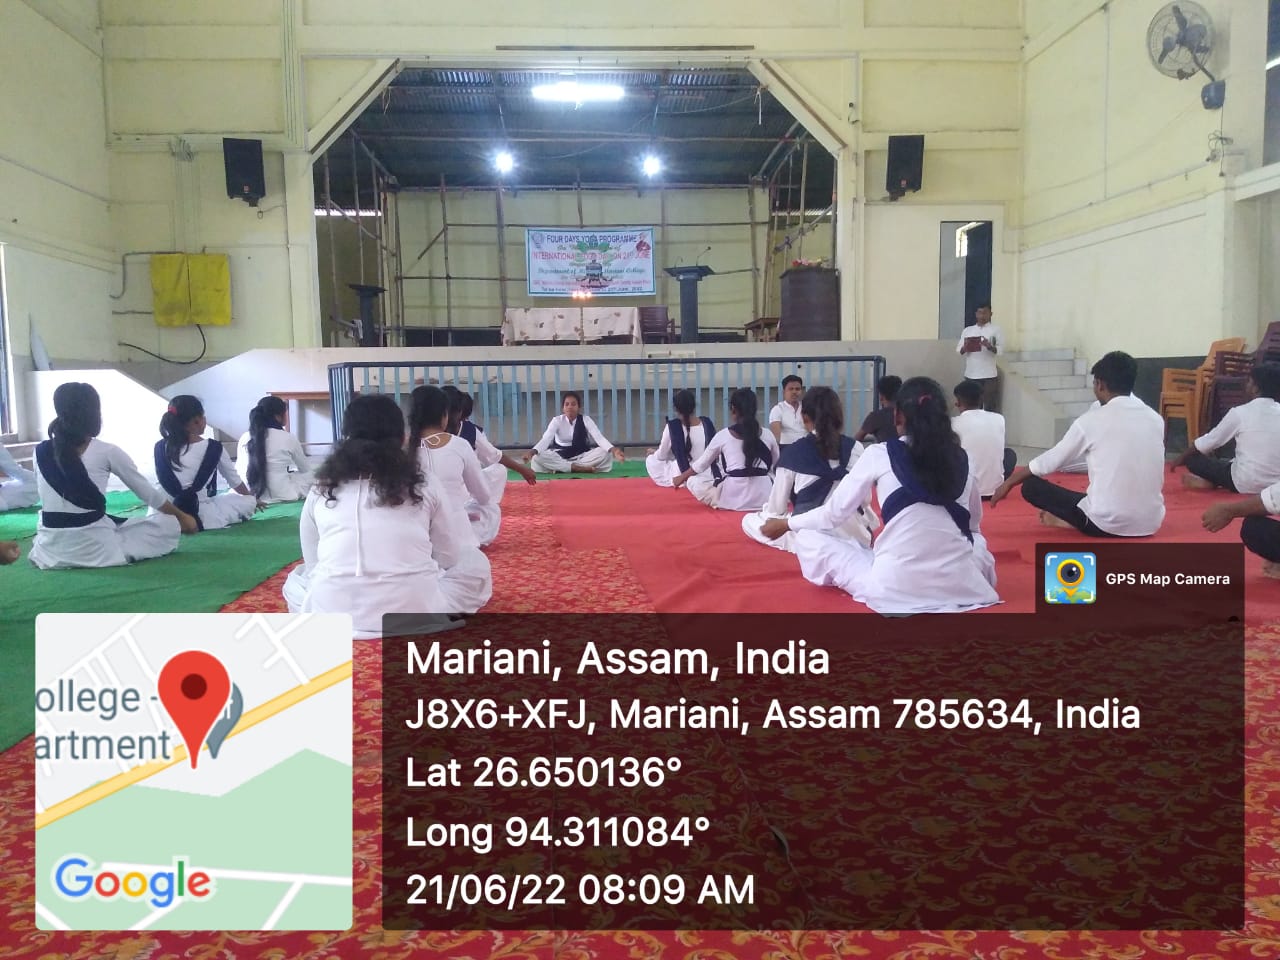 int yoga day 2022 06 21 at 13.27.30